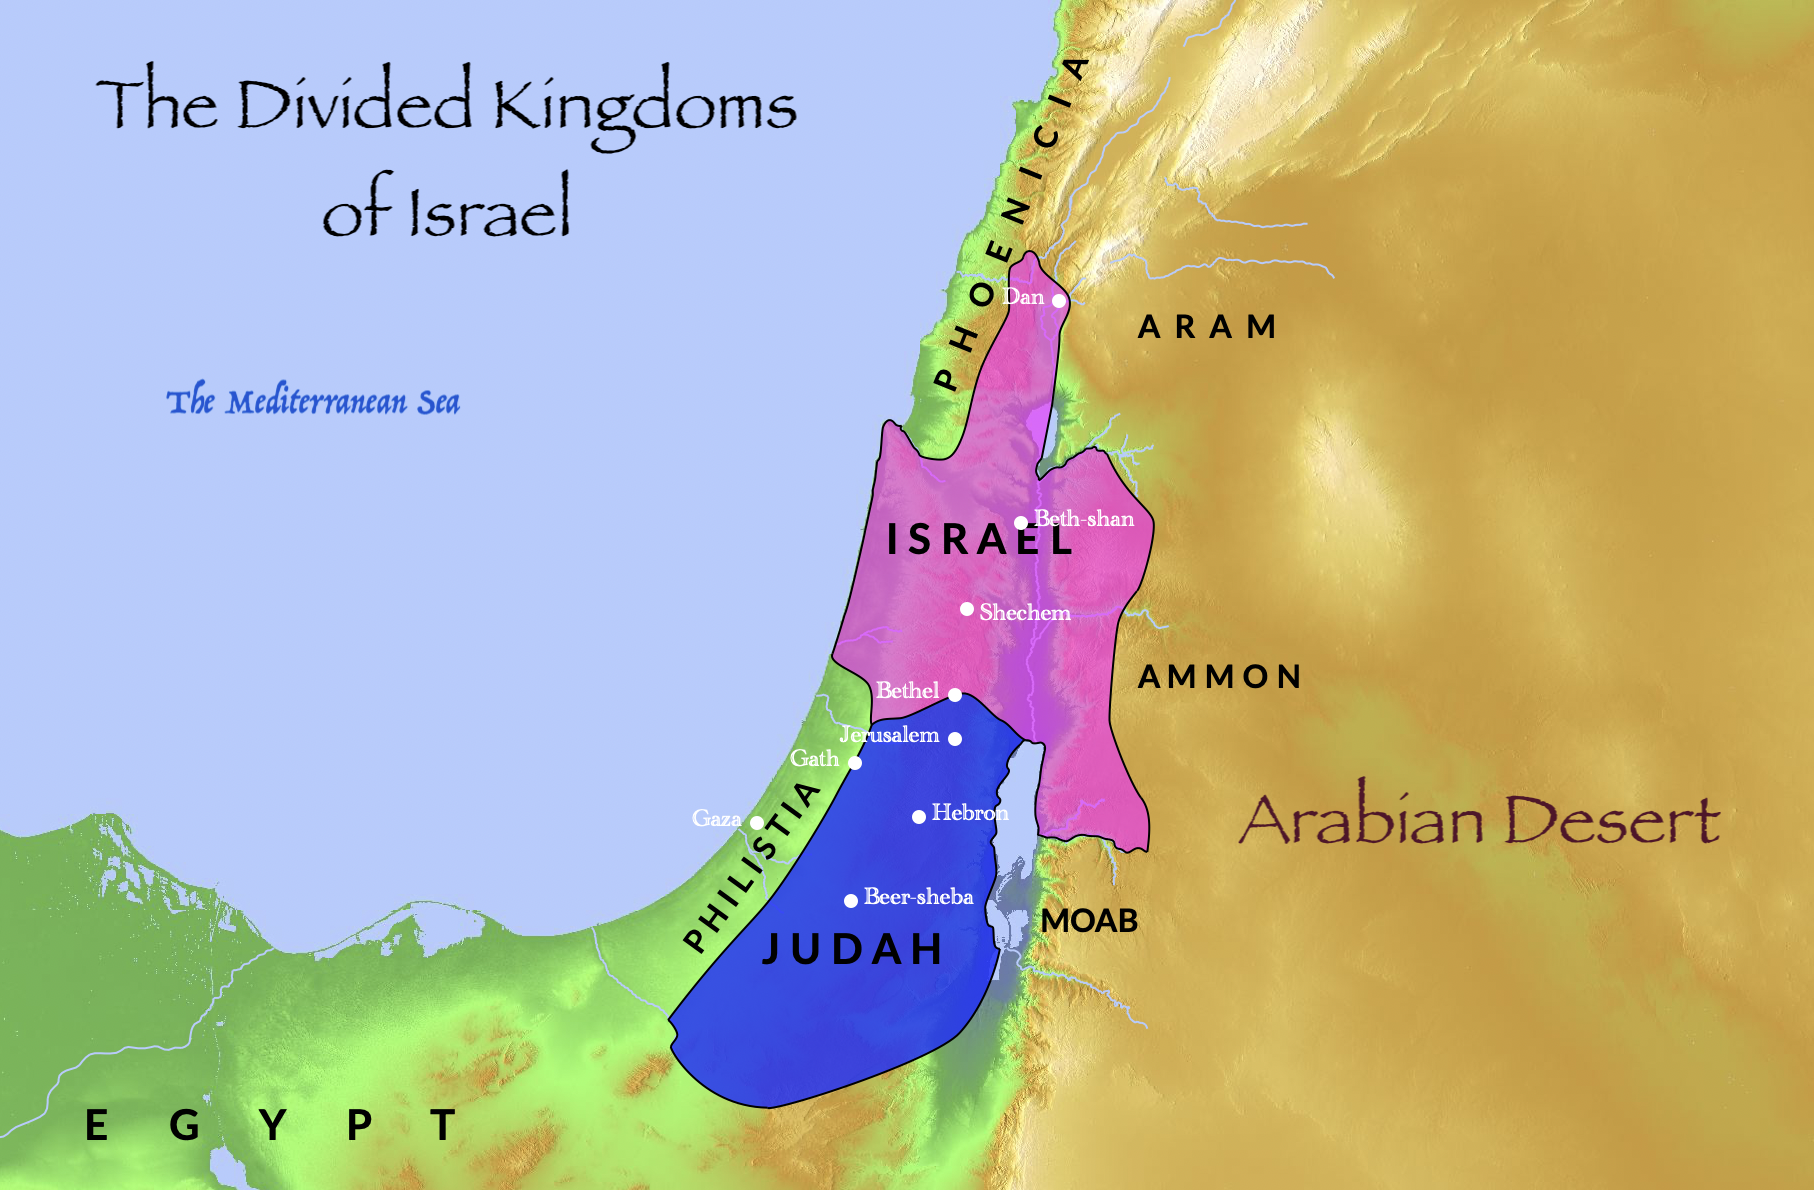 The Divided Kingdom of Israel